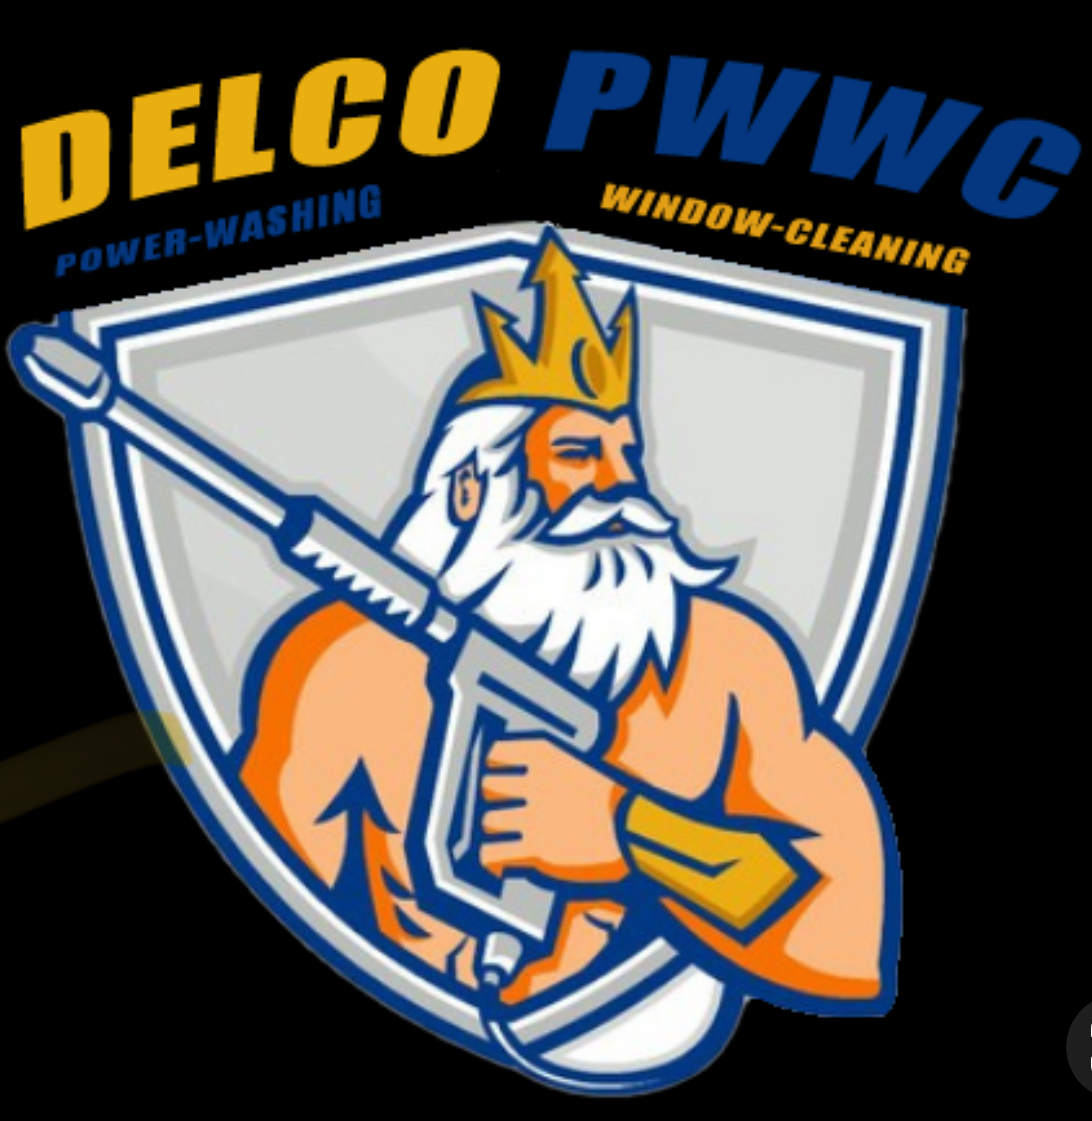 Delco Power Washing and Window Cleaning Logo